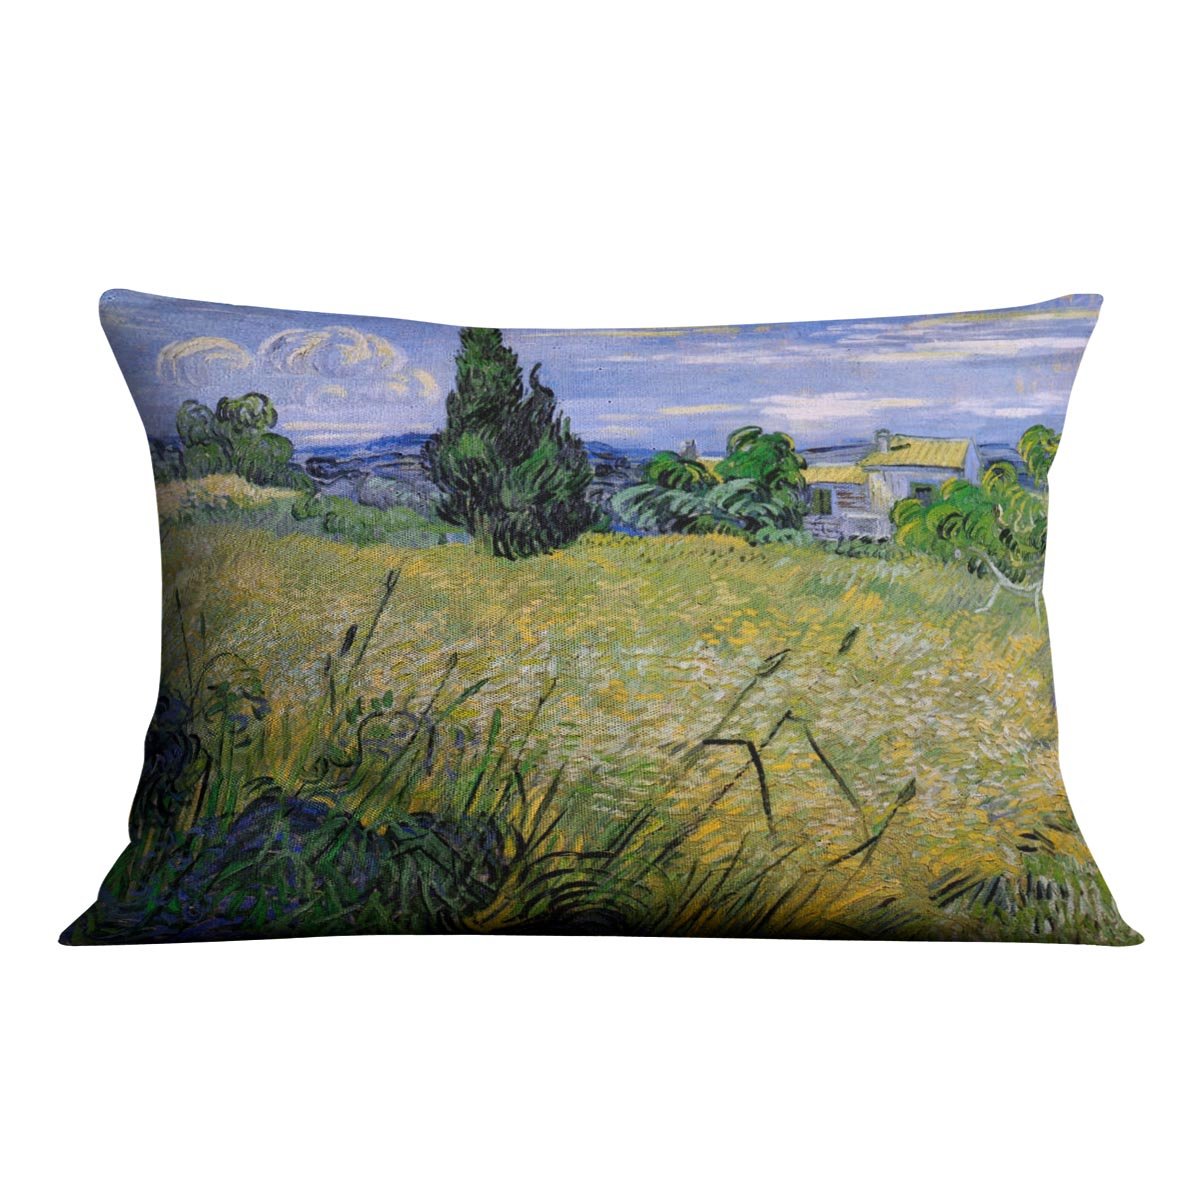 Green Wheat Field with Cypress by Van Gogh Throw Pillow